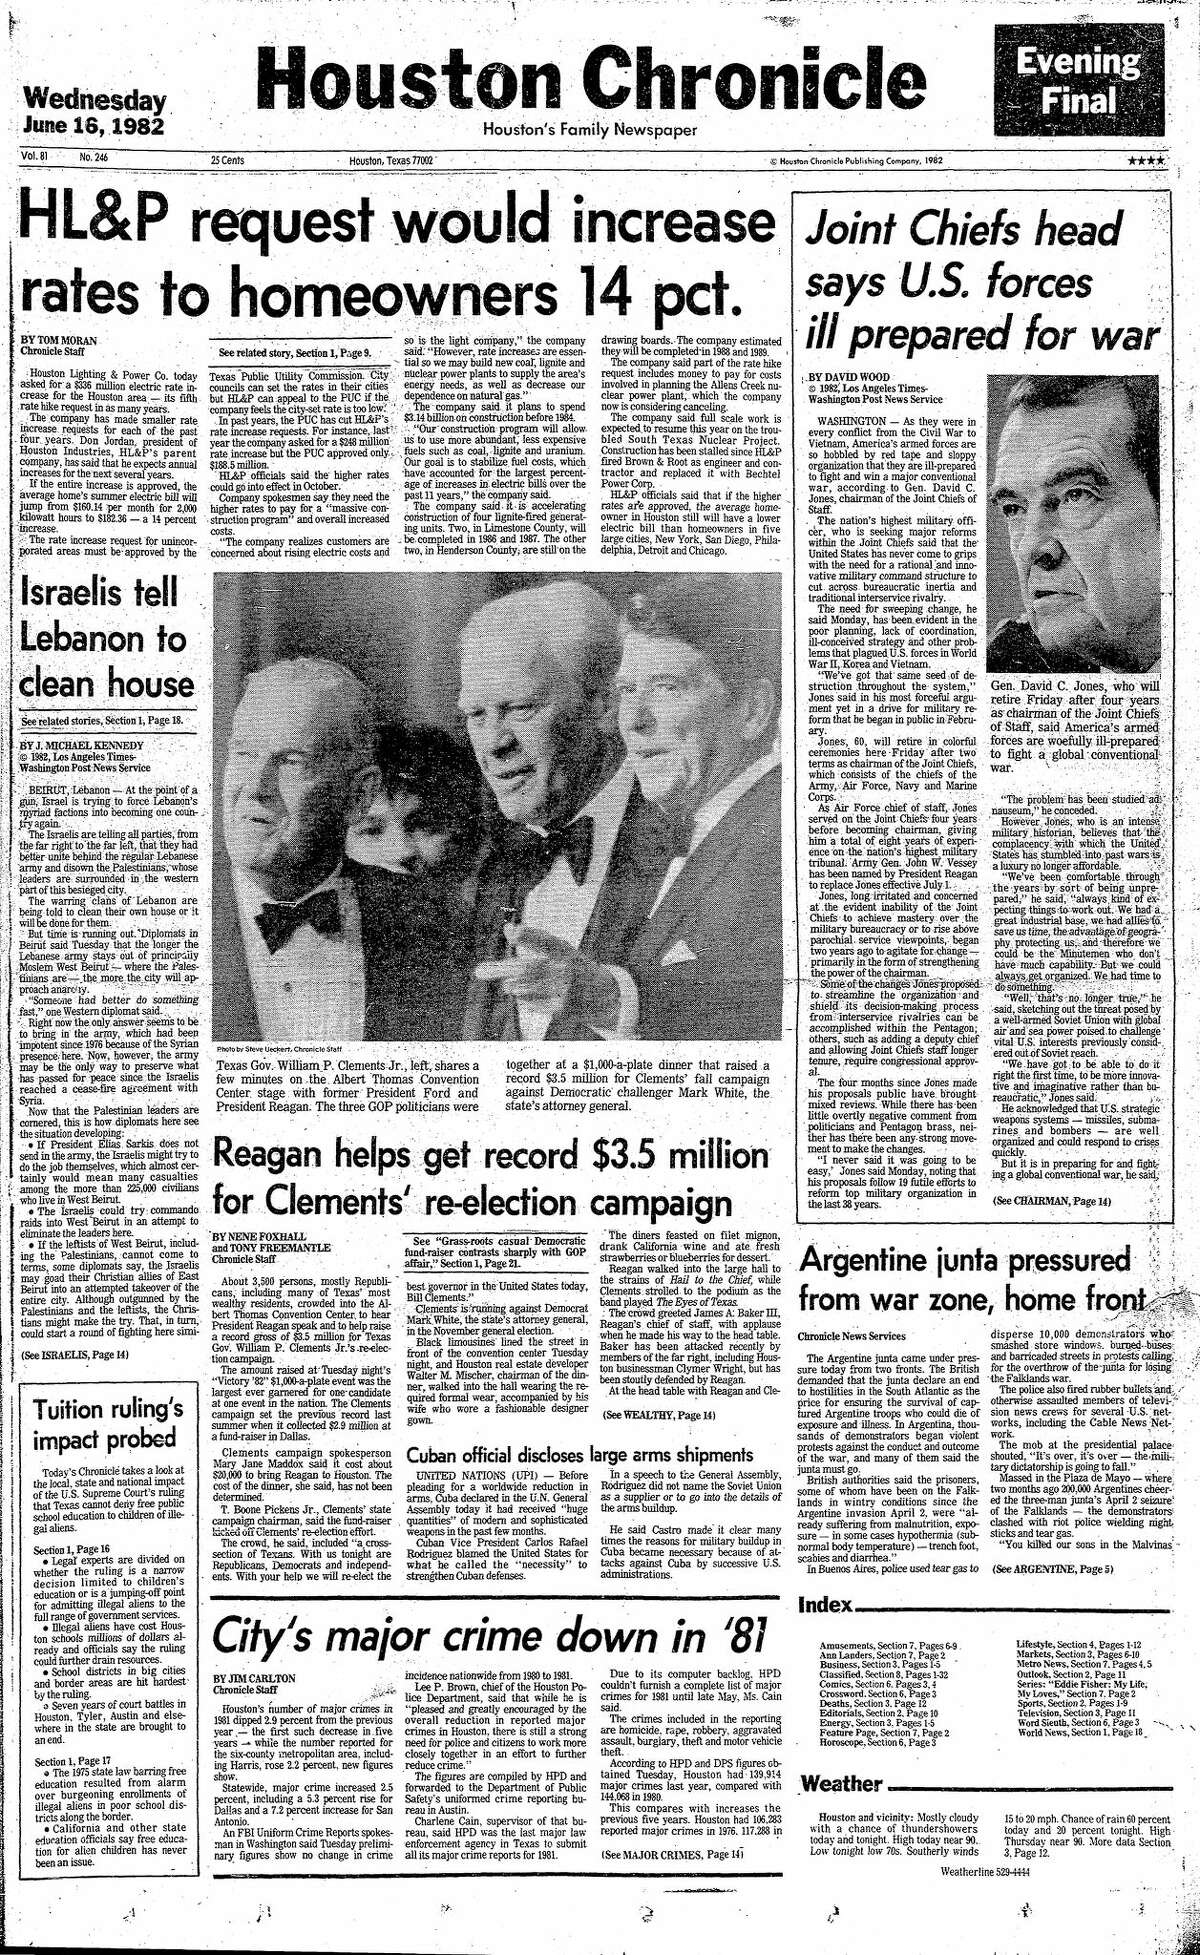 Houston Chronicle front page for June 16, 1982.